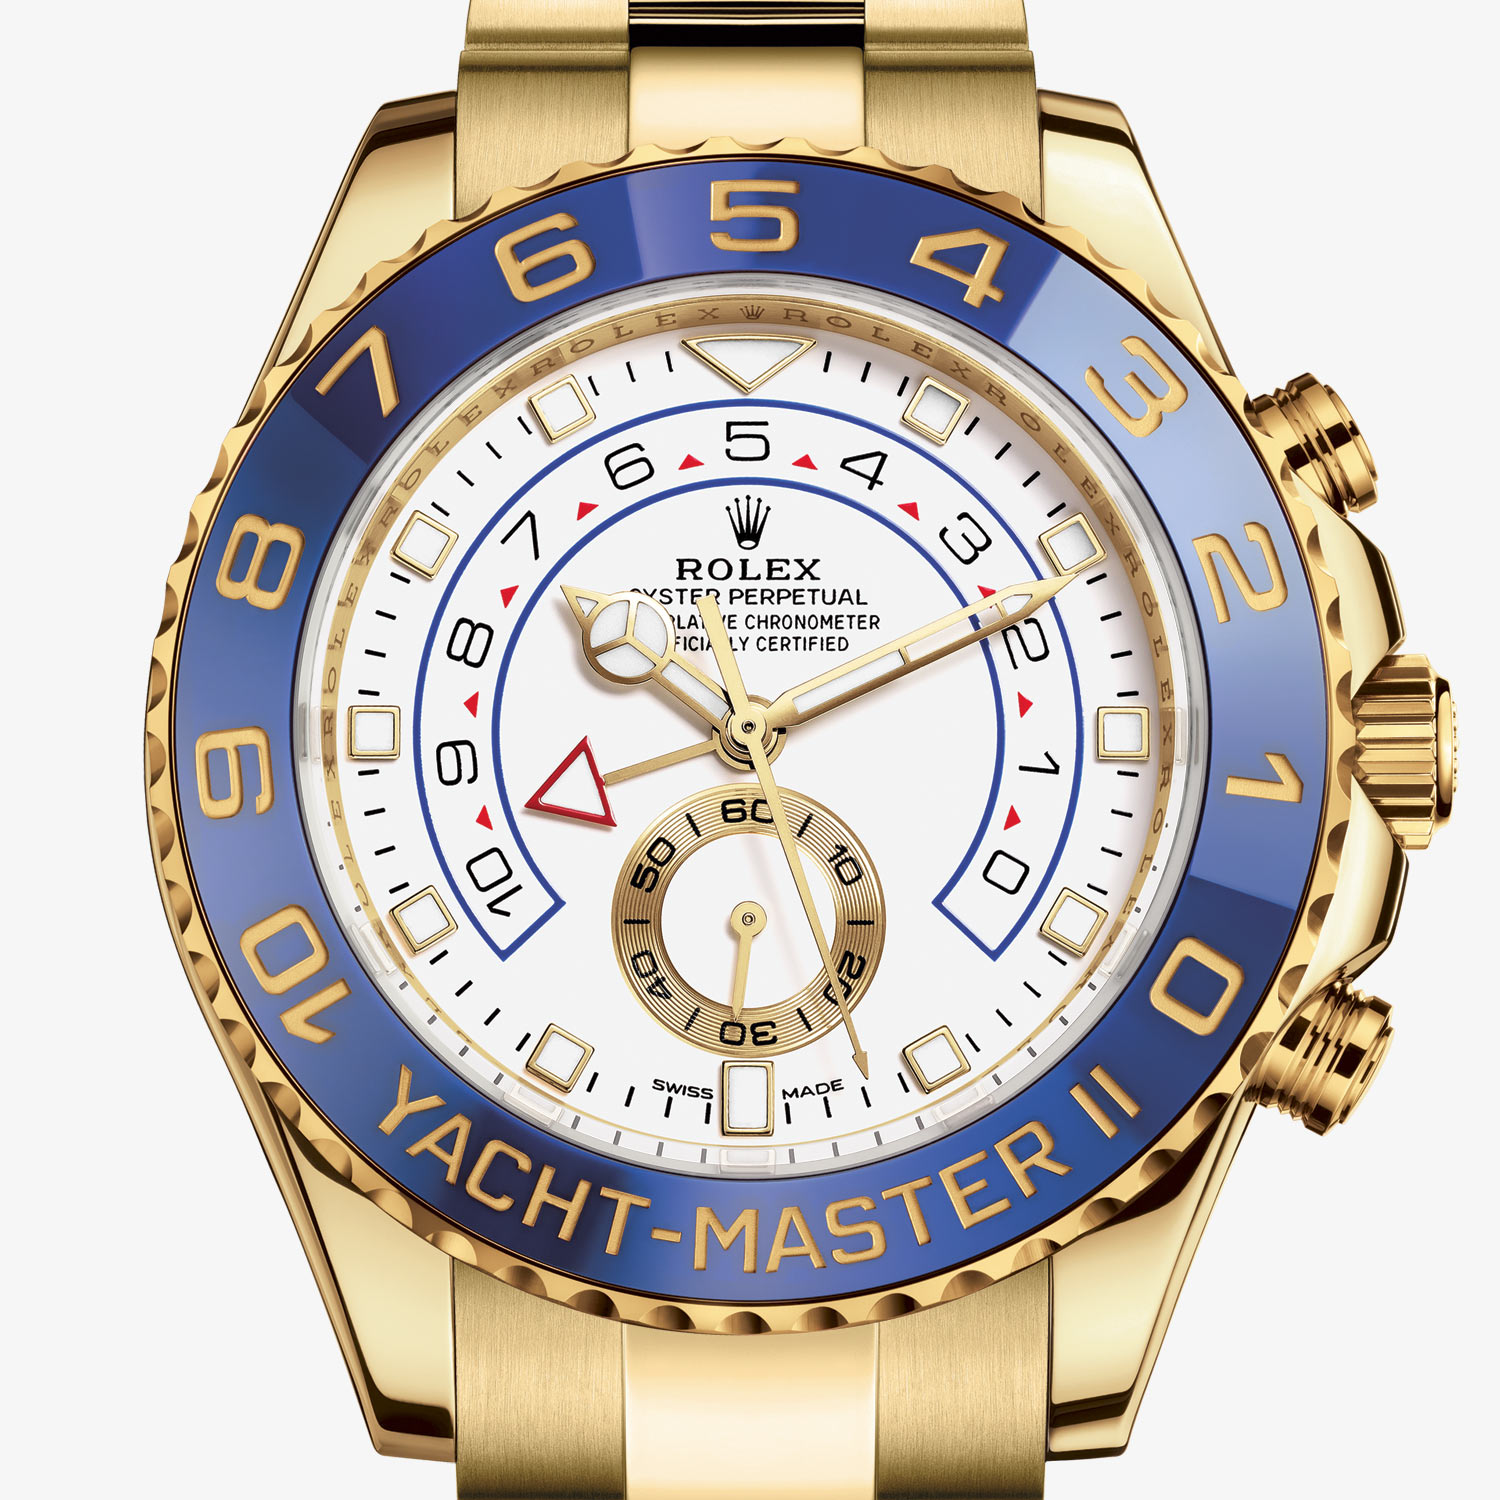 yacht master 2 cost